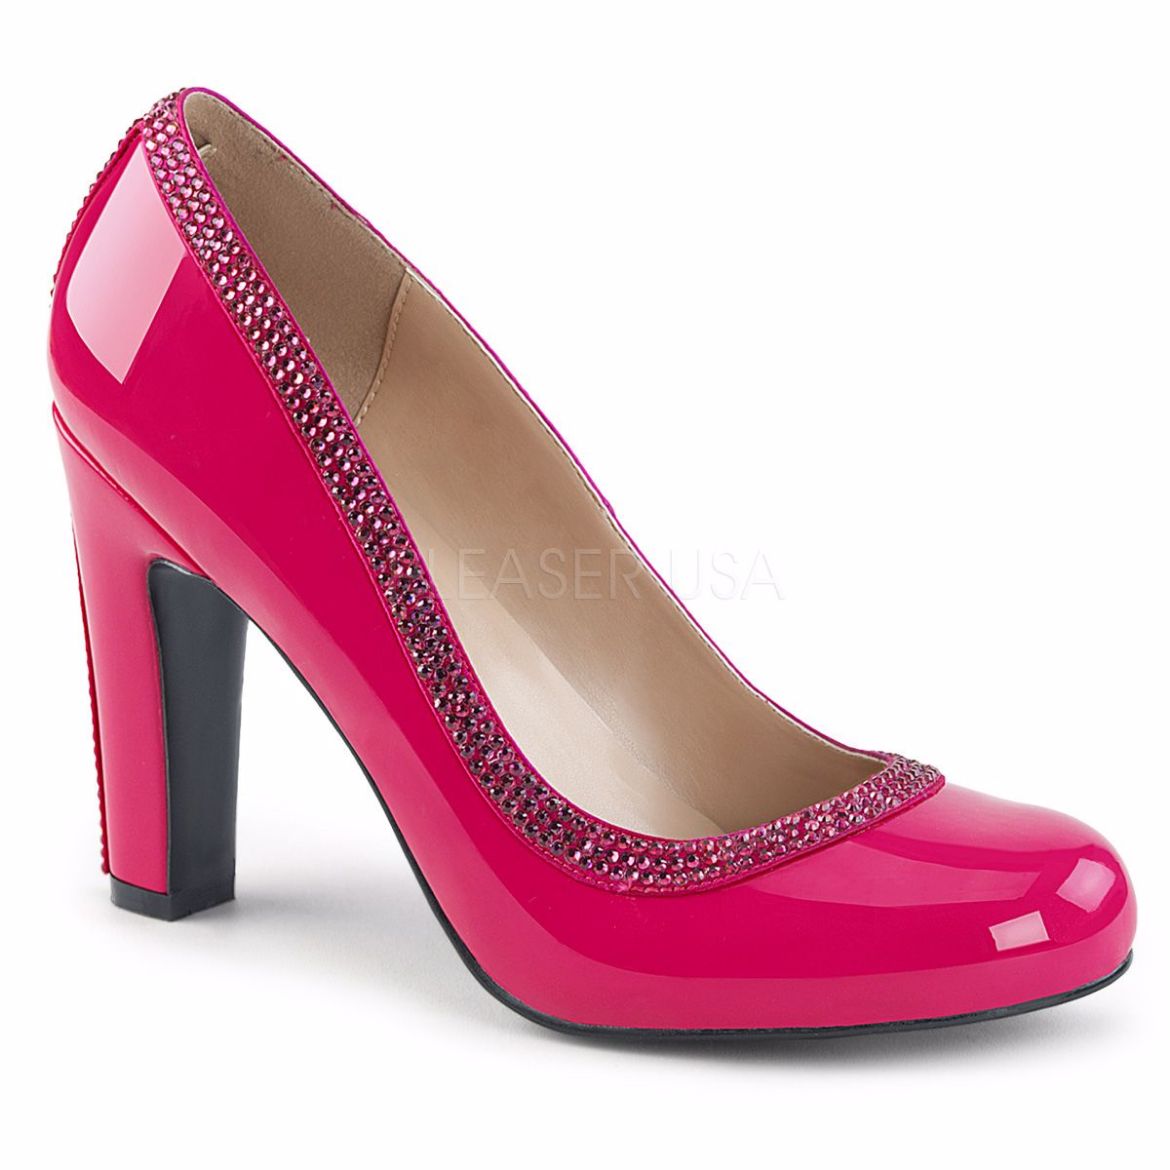 Product image of Pleaser Pink Label Queen-04 Hot Pink Patent, 4 inch (10.2 cm) Heel Court Pump Shoes